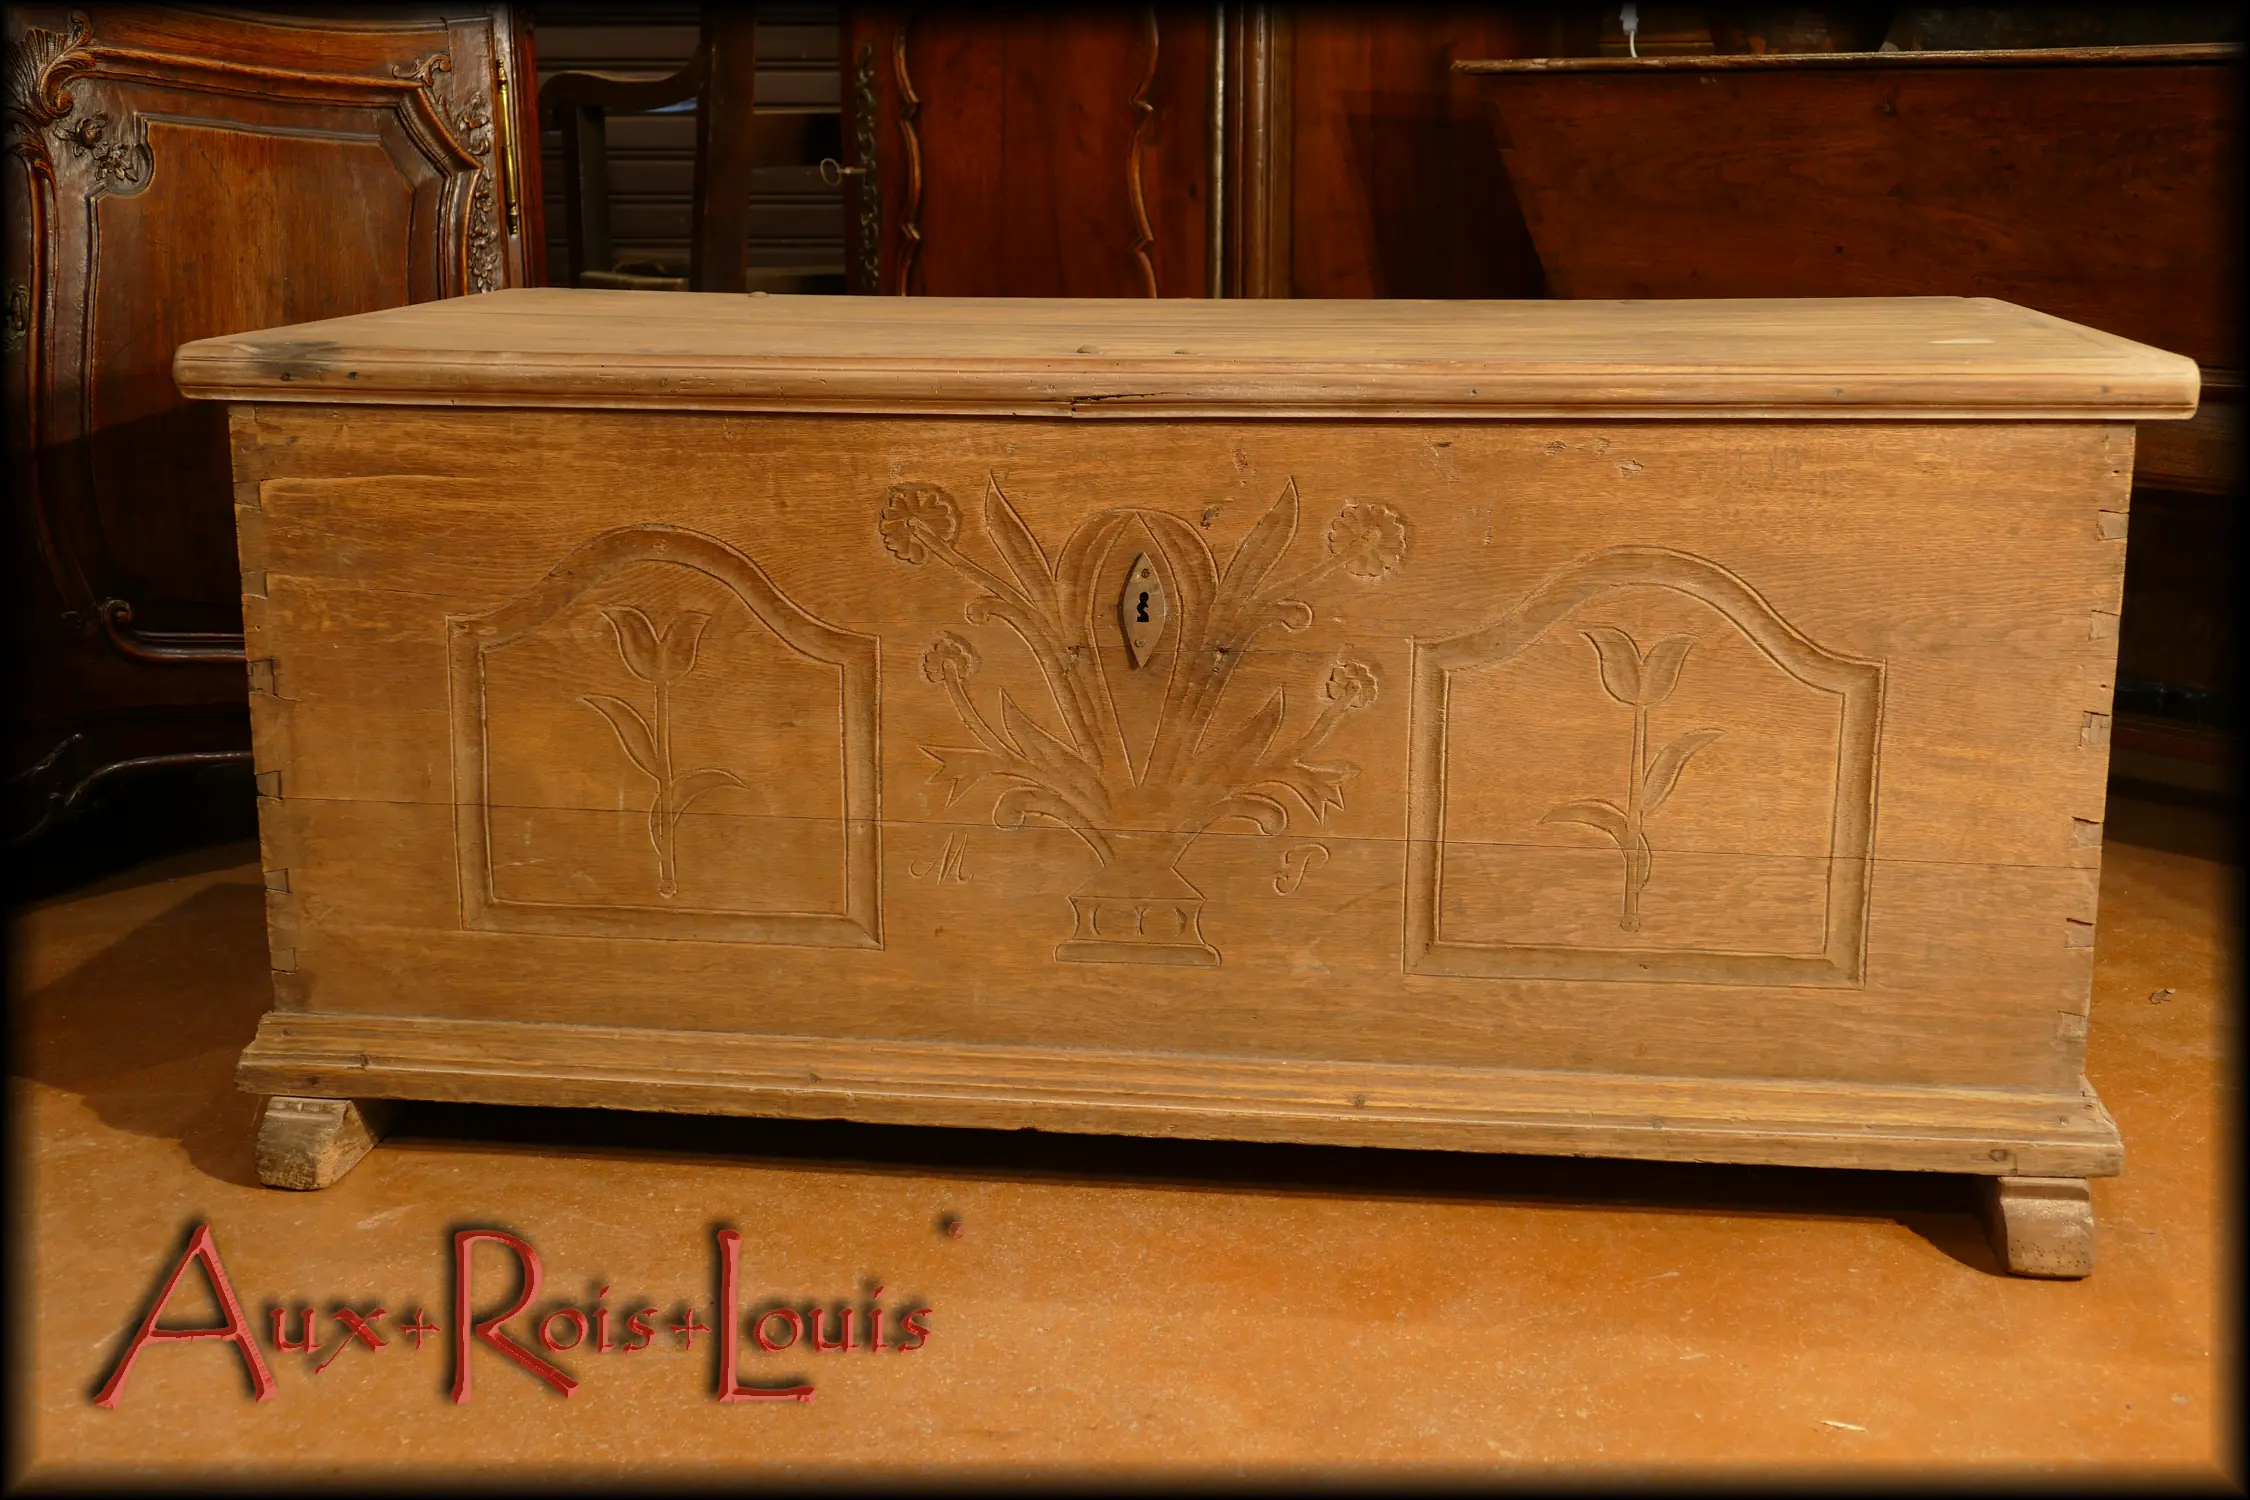 Offered as part of the bride's dowry by her father, this natural oak chest adorned with tulips and a country bouquet served two purposes in the 18th century: to hold the personal effects of the young bride and to allow the couple to sit at the foot of their bed in complete intimacy. Hence its name "end-of-bed chest."